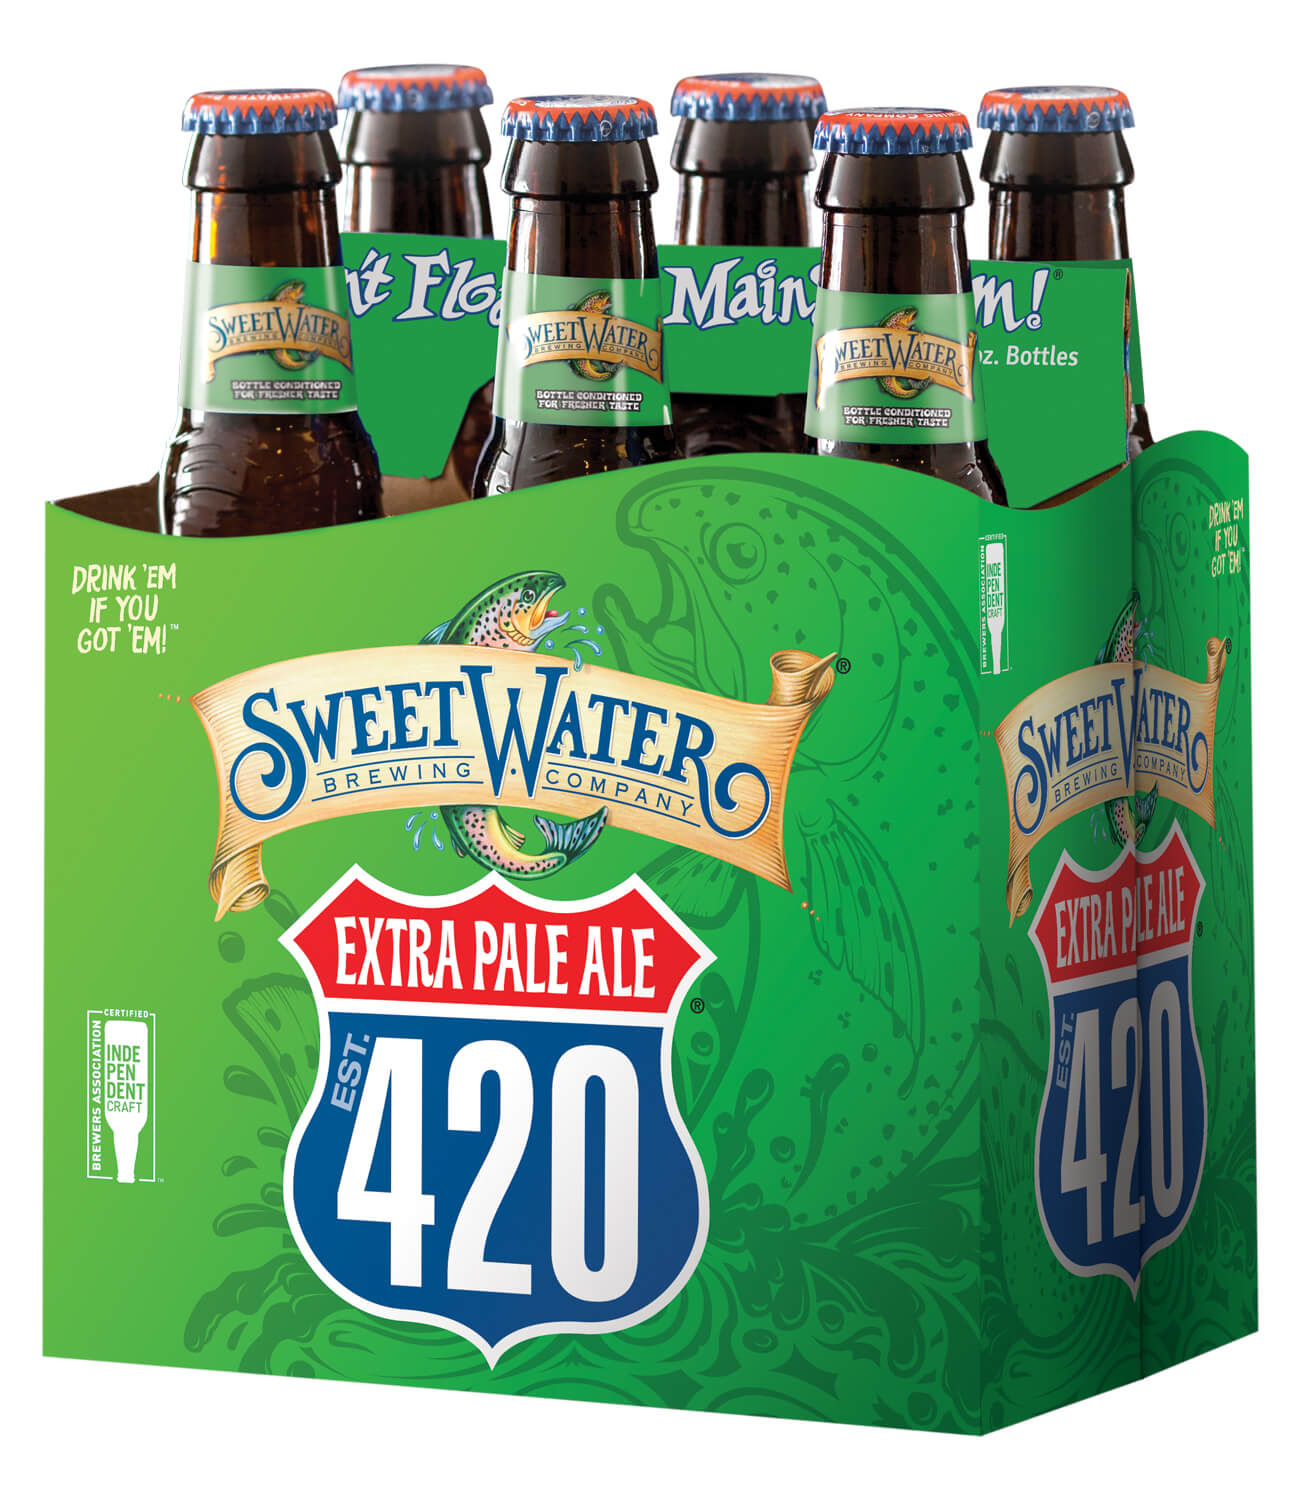 NEW IN BOX SWEETWATER BREWING GA 420 EXTRA PALE ALE Beer Tap Handle 